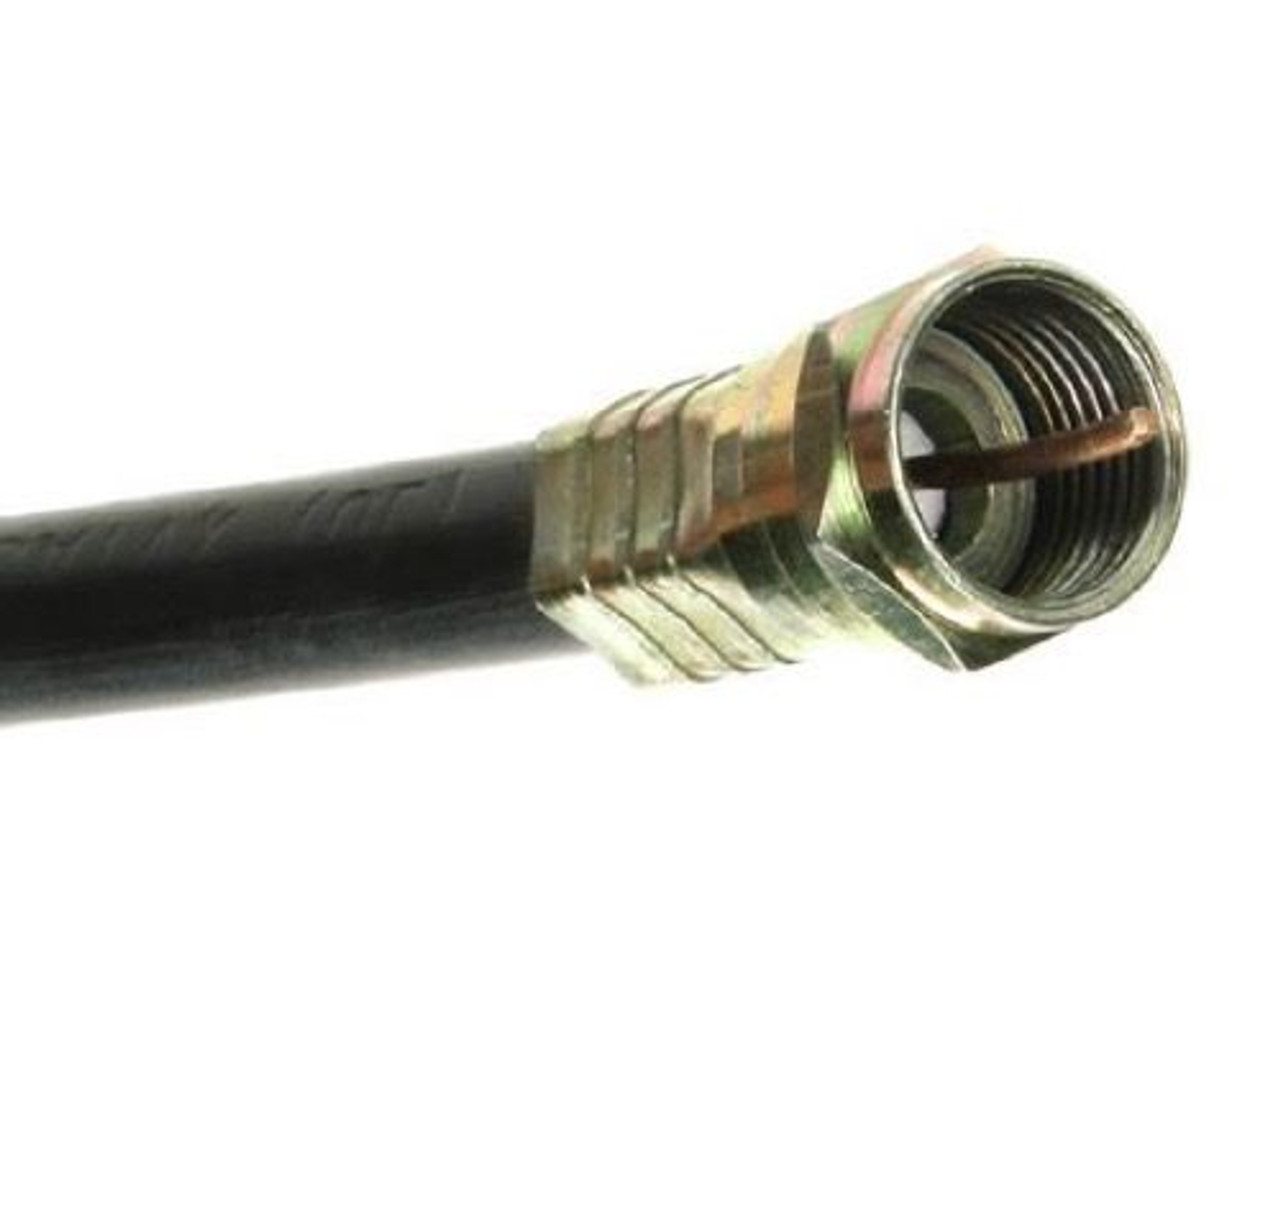 Eagle 30' FT RG6 Coaxial Cable Black with Gold F Connector Installed Each End RG-6 F to F Audio Video Signal 75 Ohm Component Shielded Connector HDTV Jumper